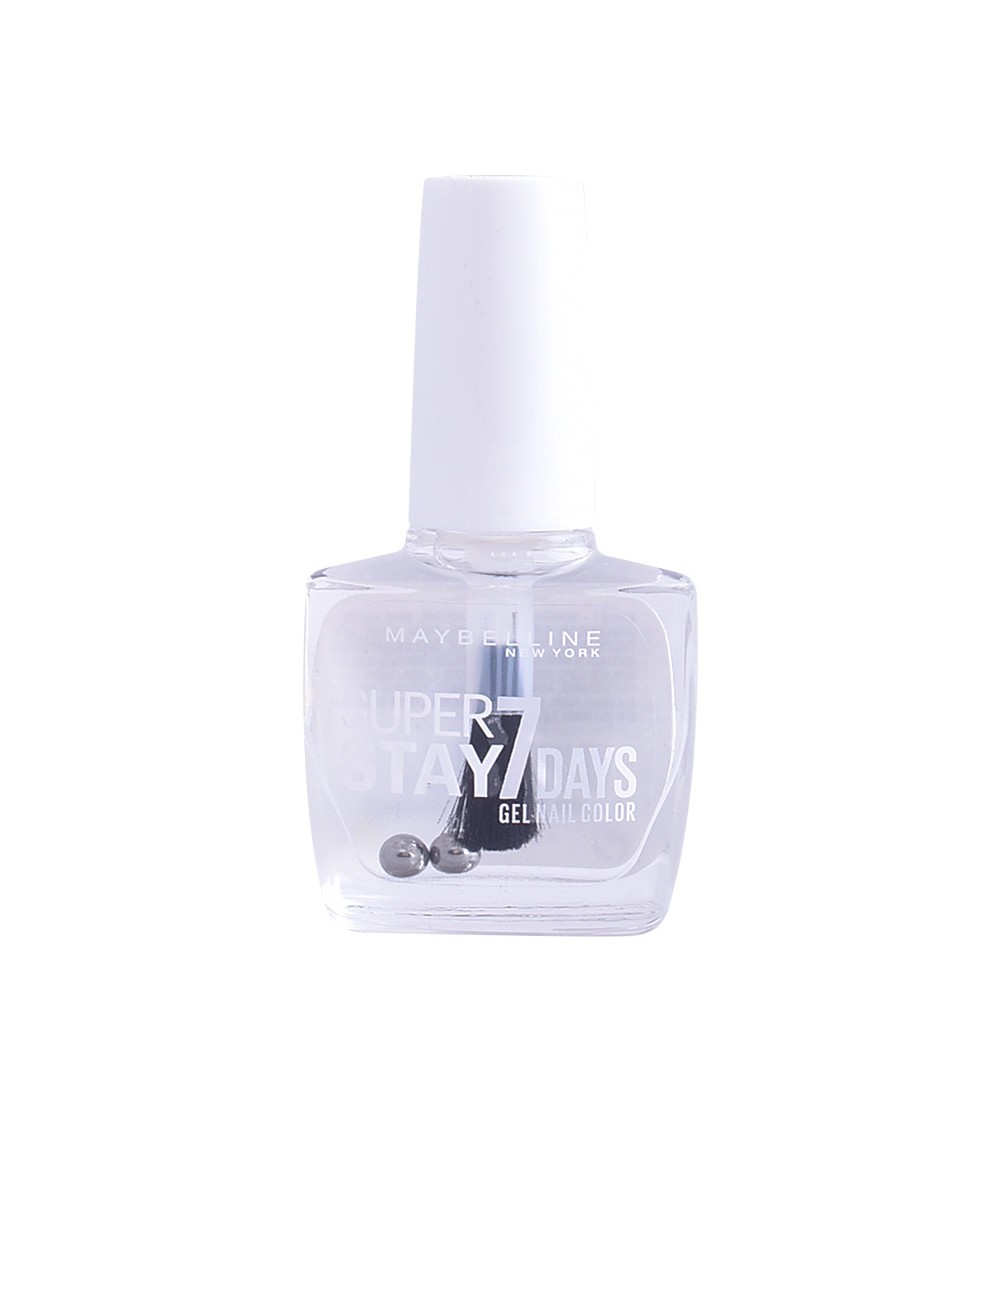 SUPERSTAY nail gel color 025-cristal clear